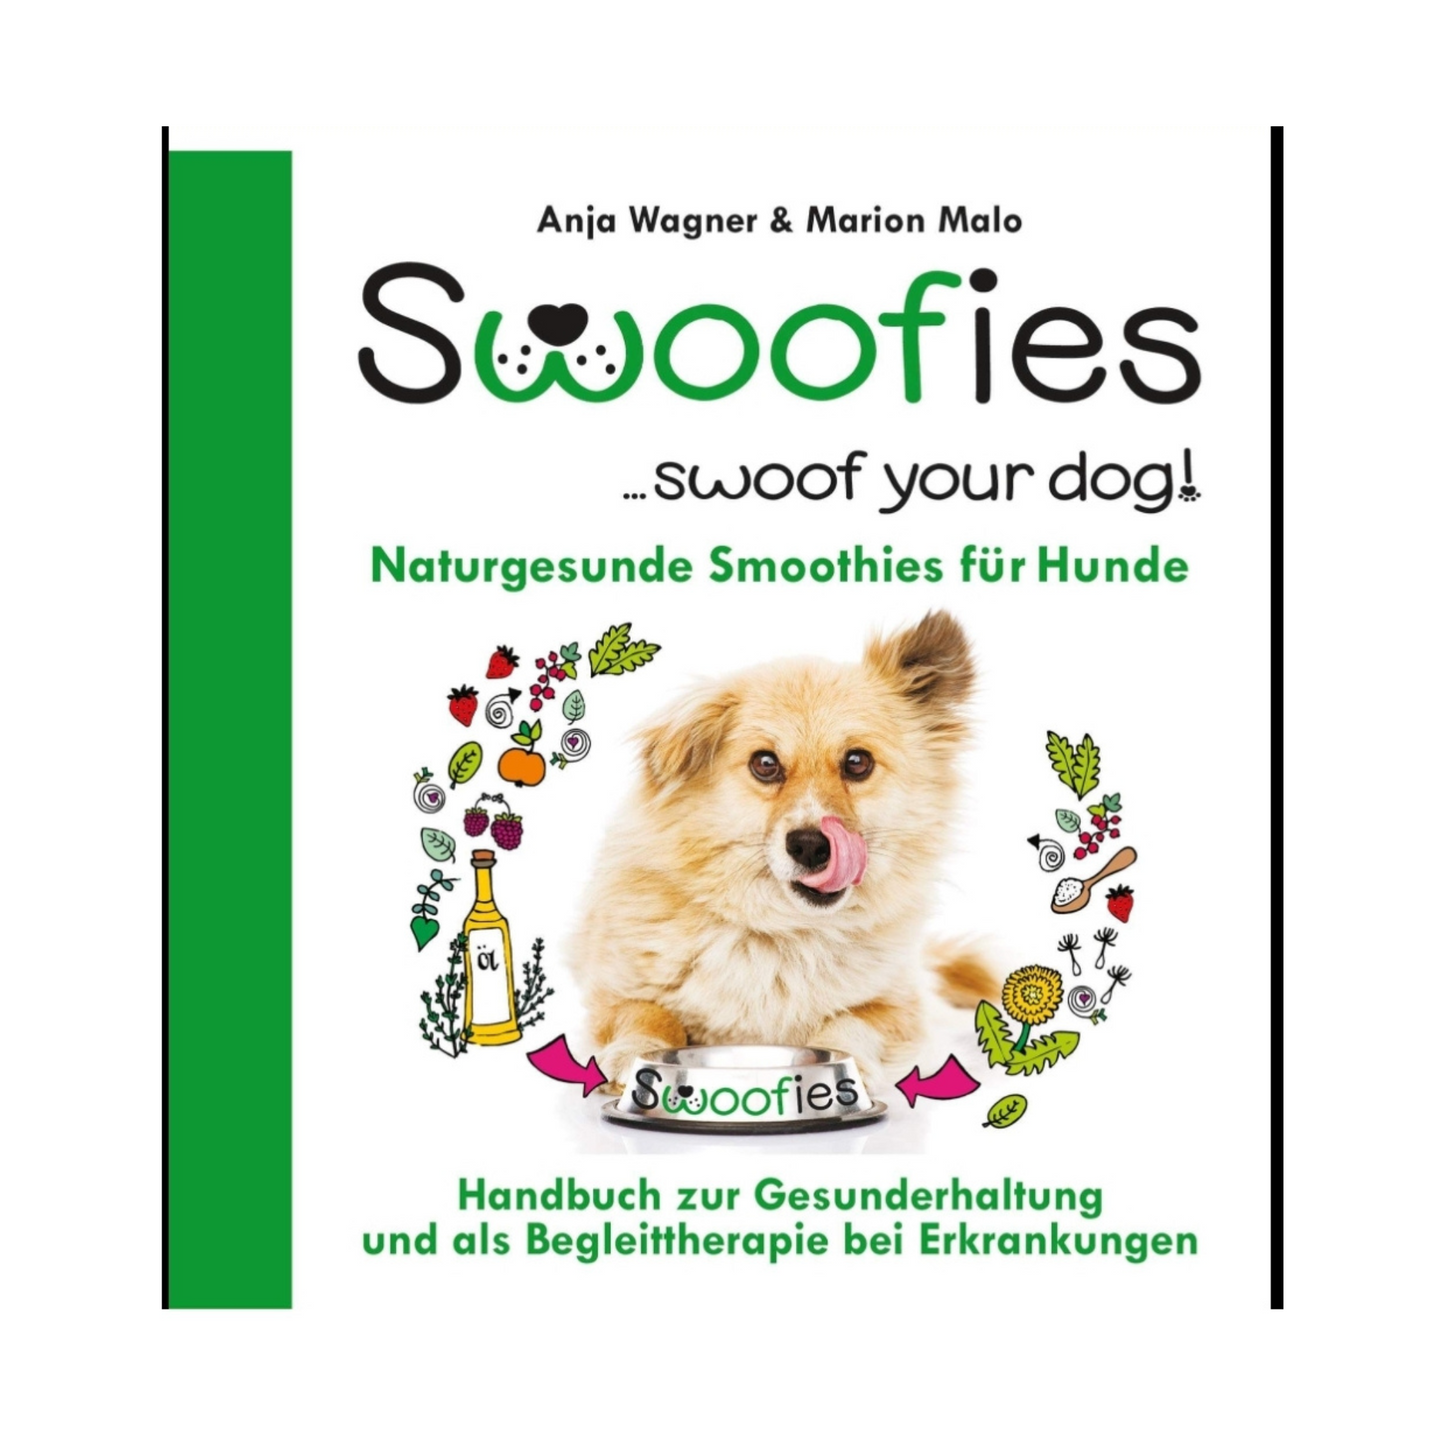 Swoofies - swoof your Dog!